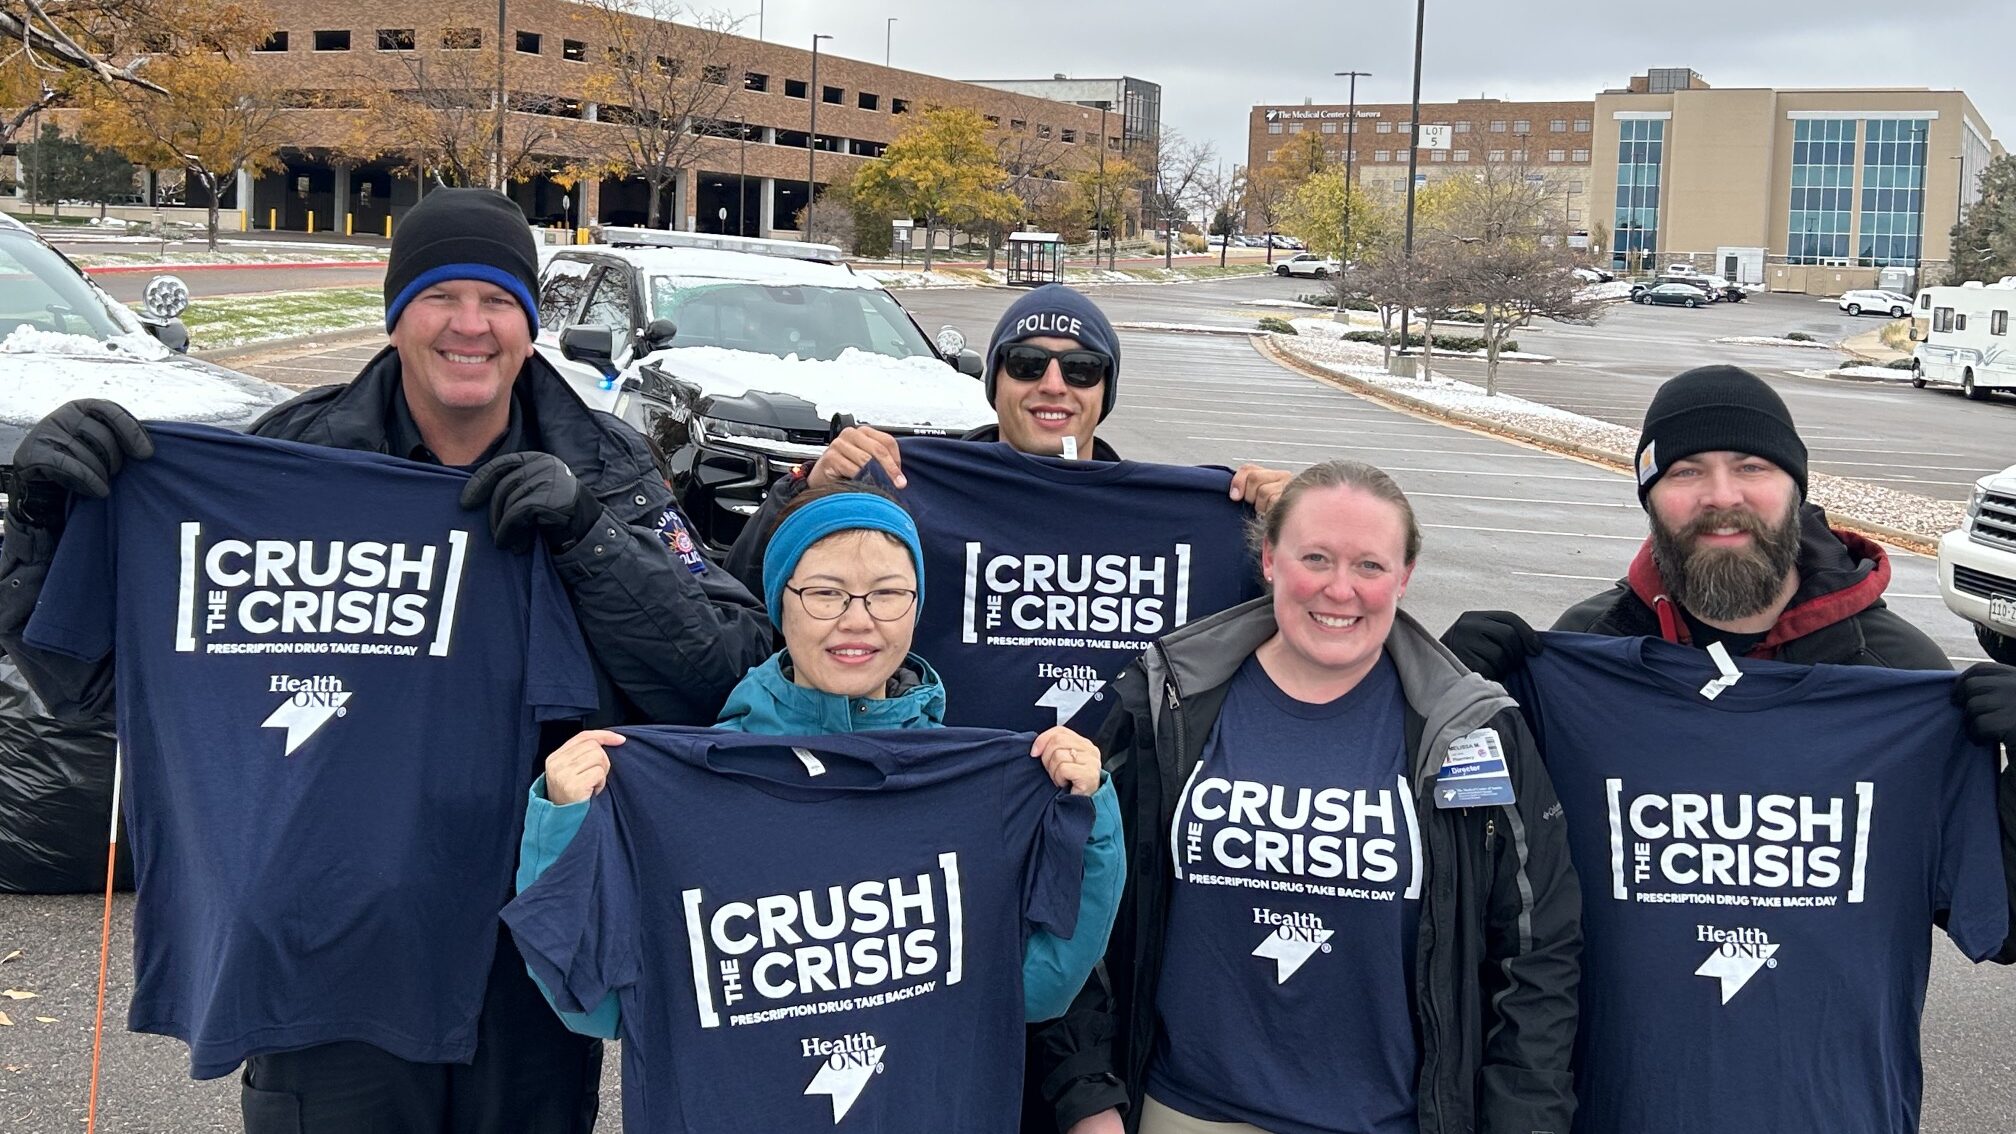 HCA Healthcare colleagues with Crush the Crisis t-shirts in the cold temperatures outside The Medical Center of Aurora